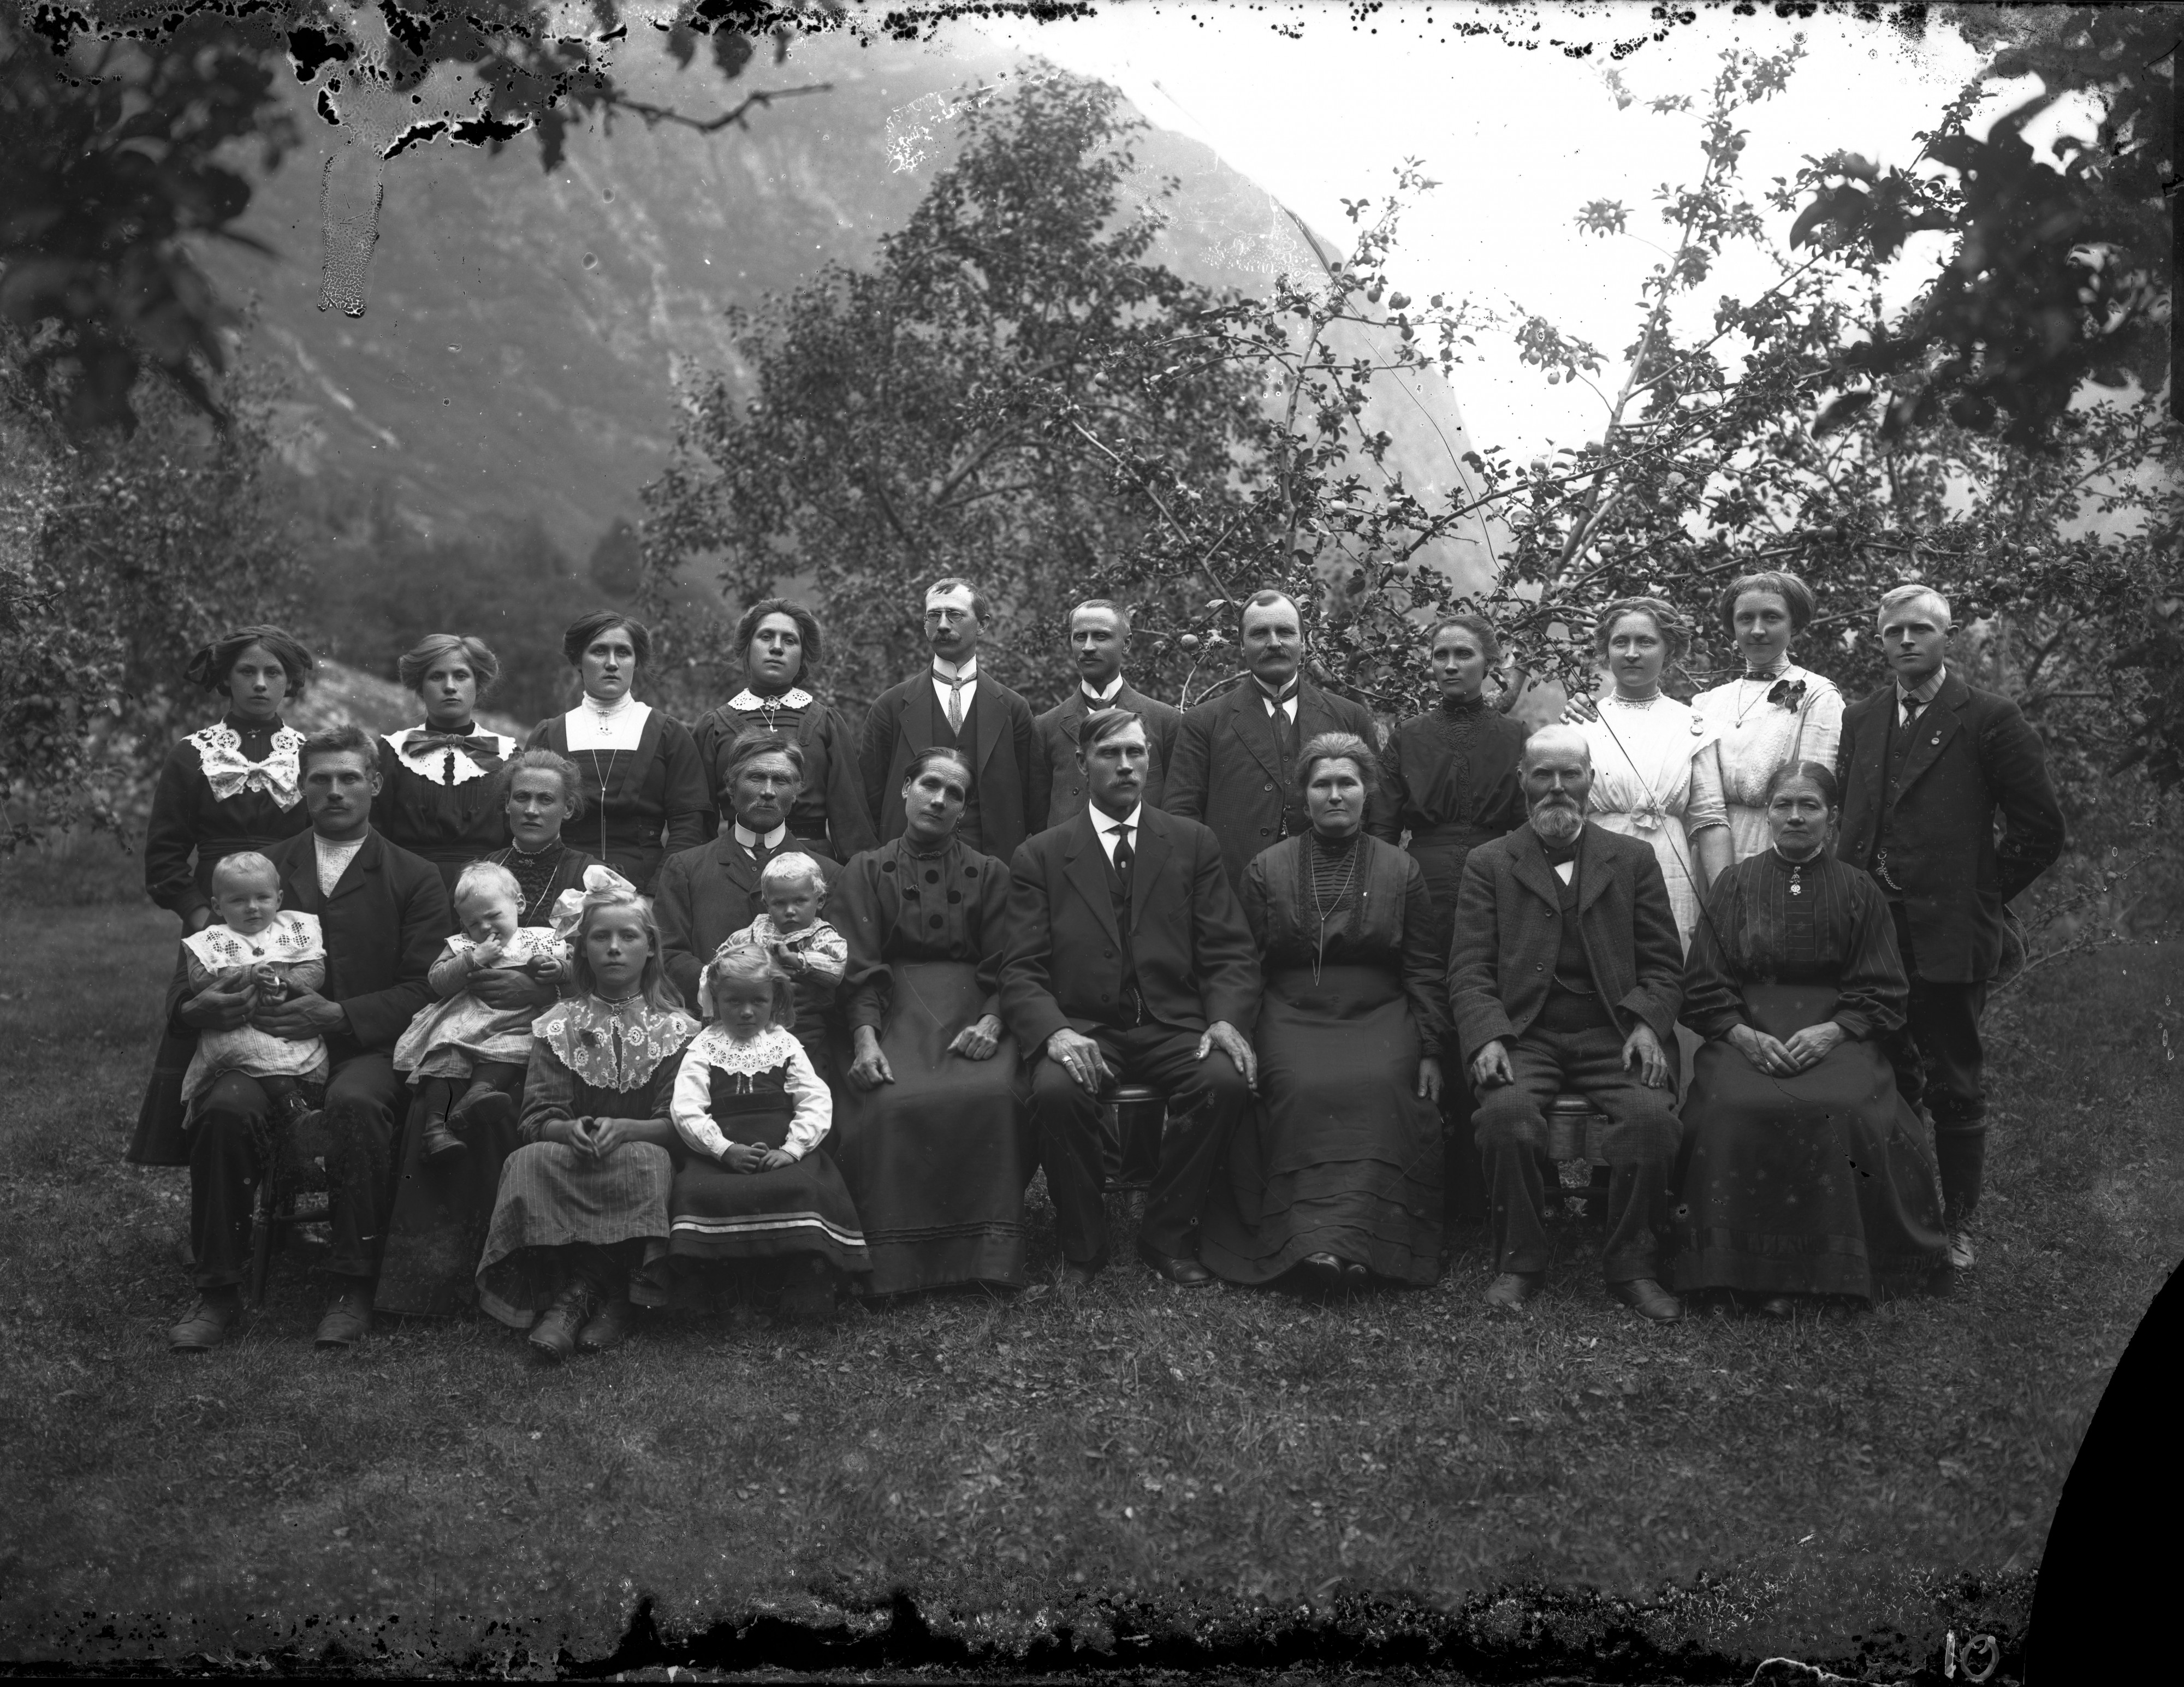 Knut A. Aaning Group photo ca. 1900-1922